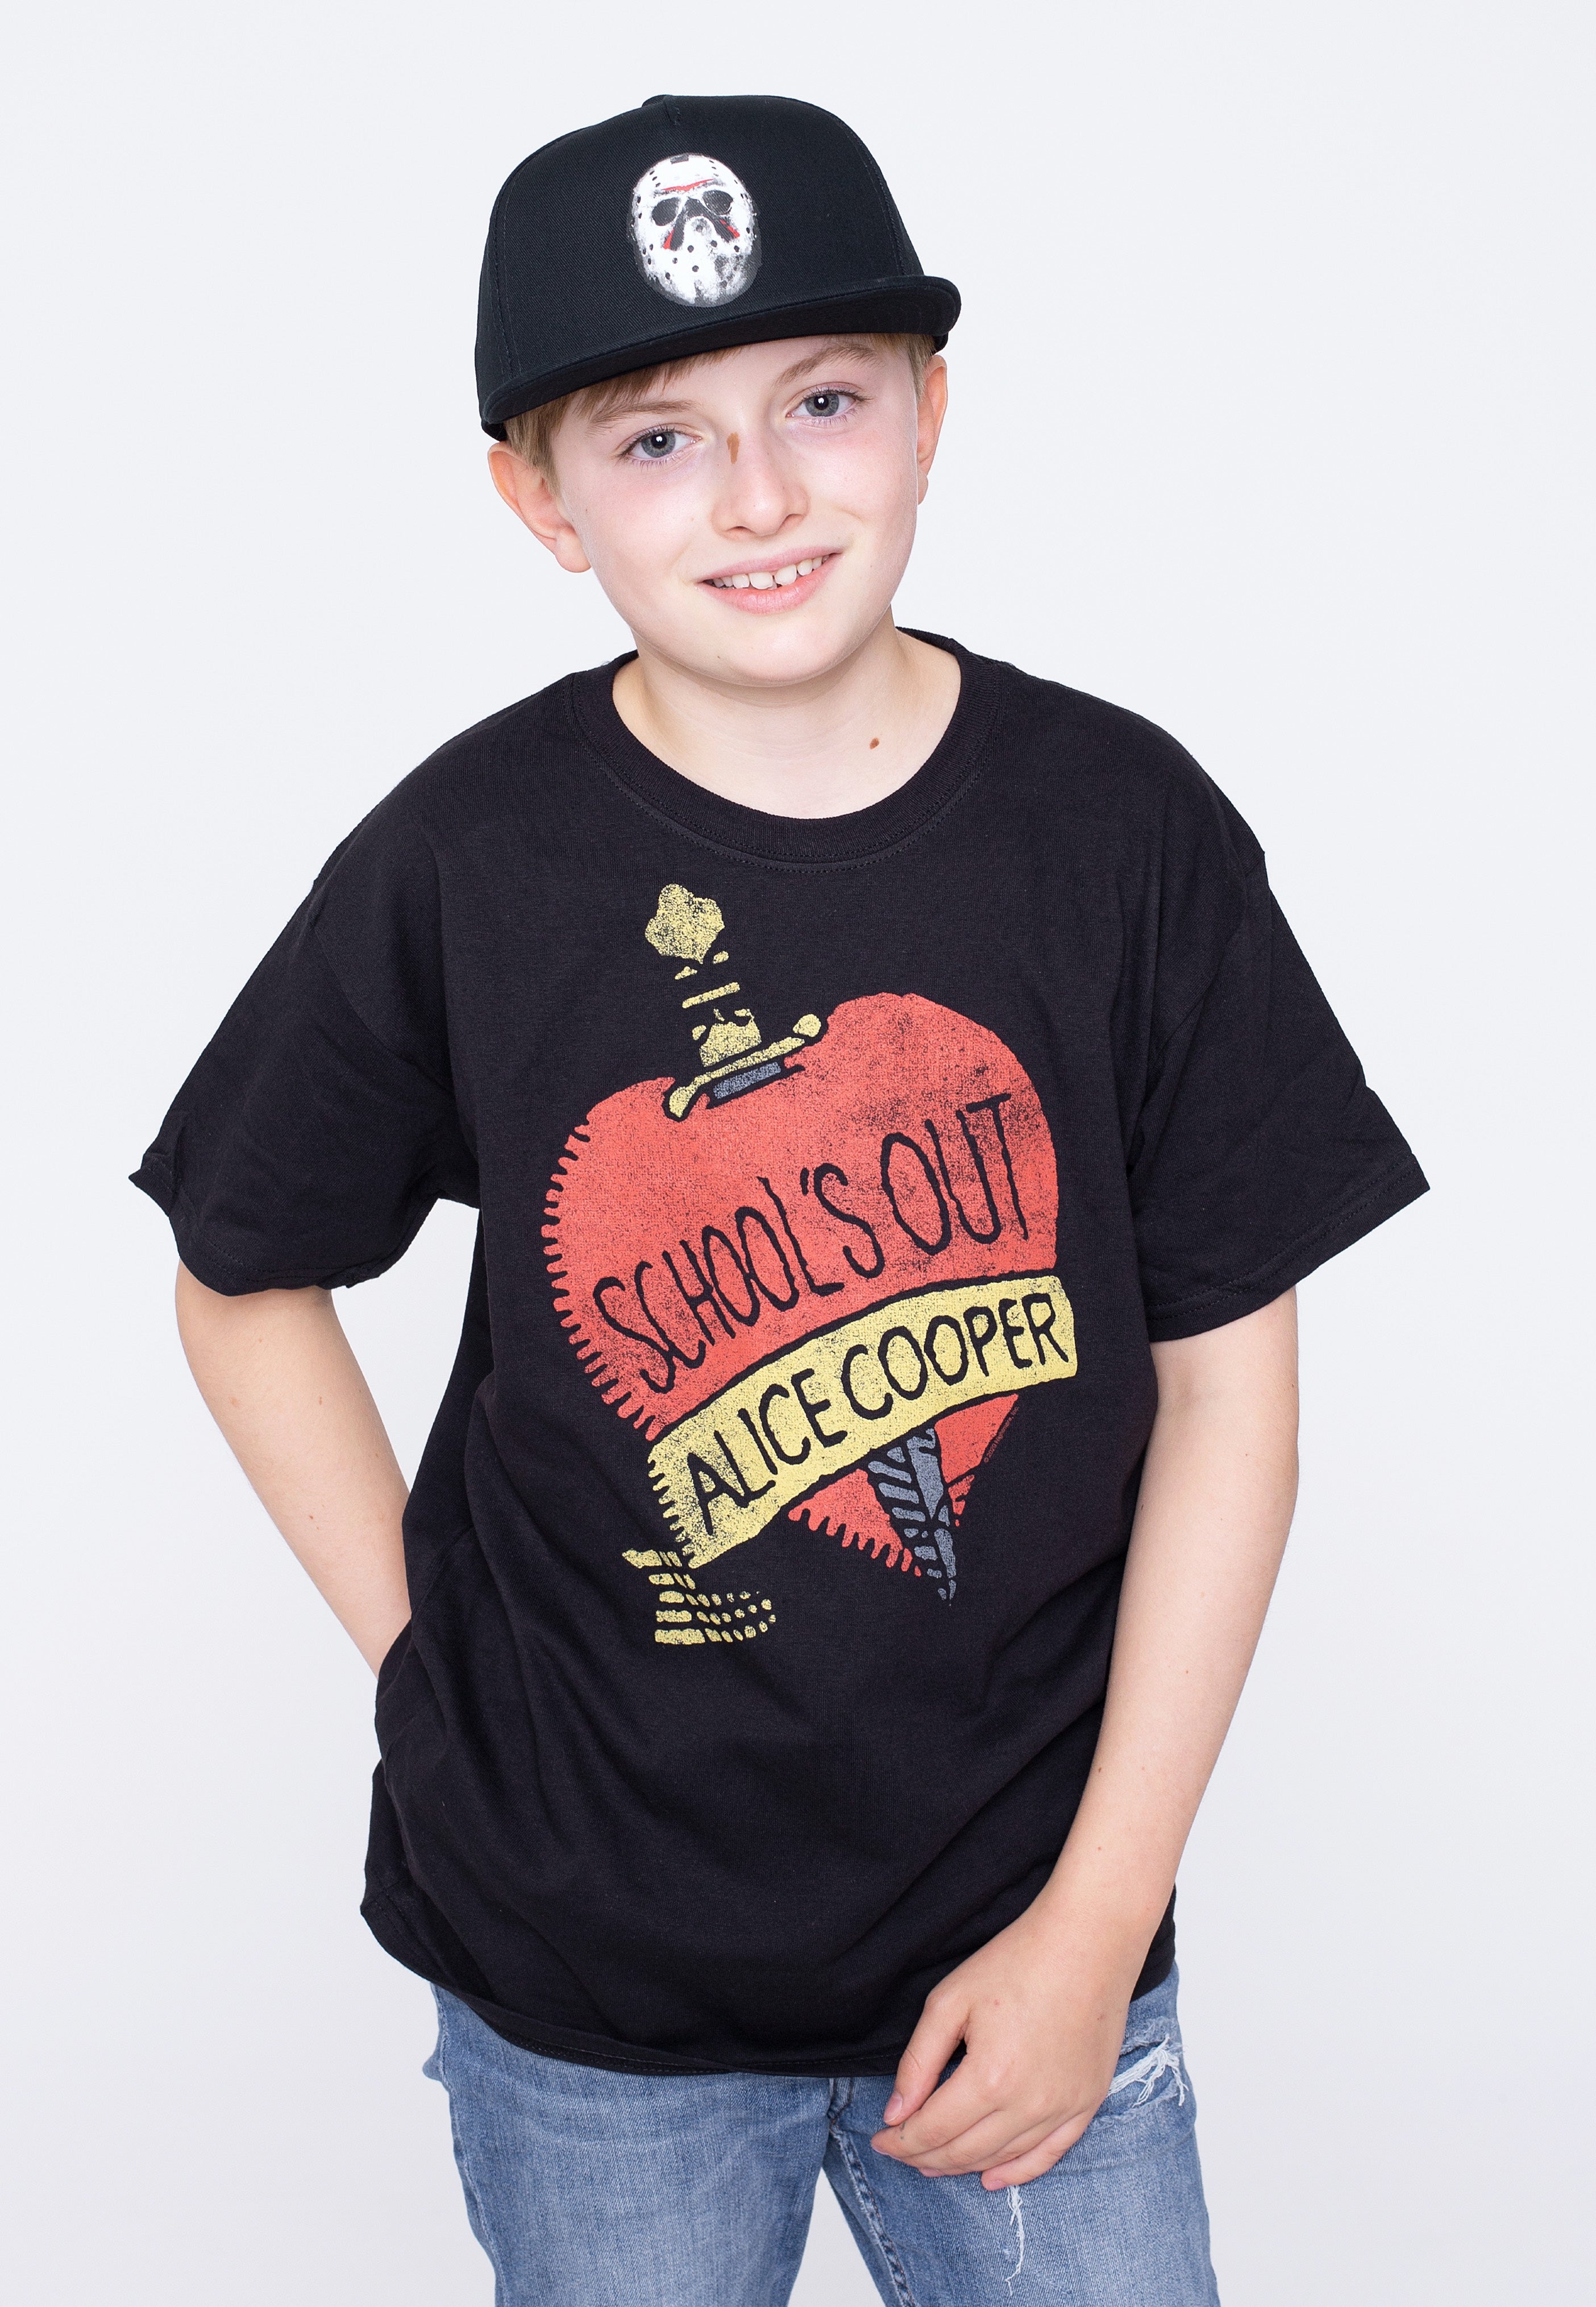 Alice Cooper - Schools Out Kids - T-Shirt